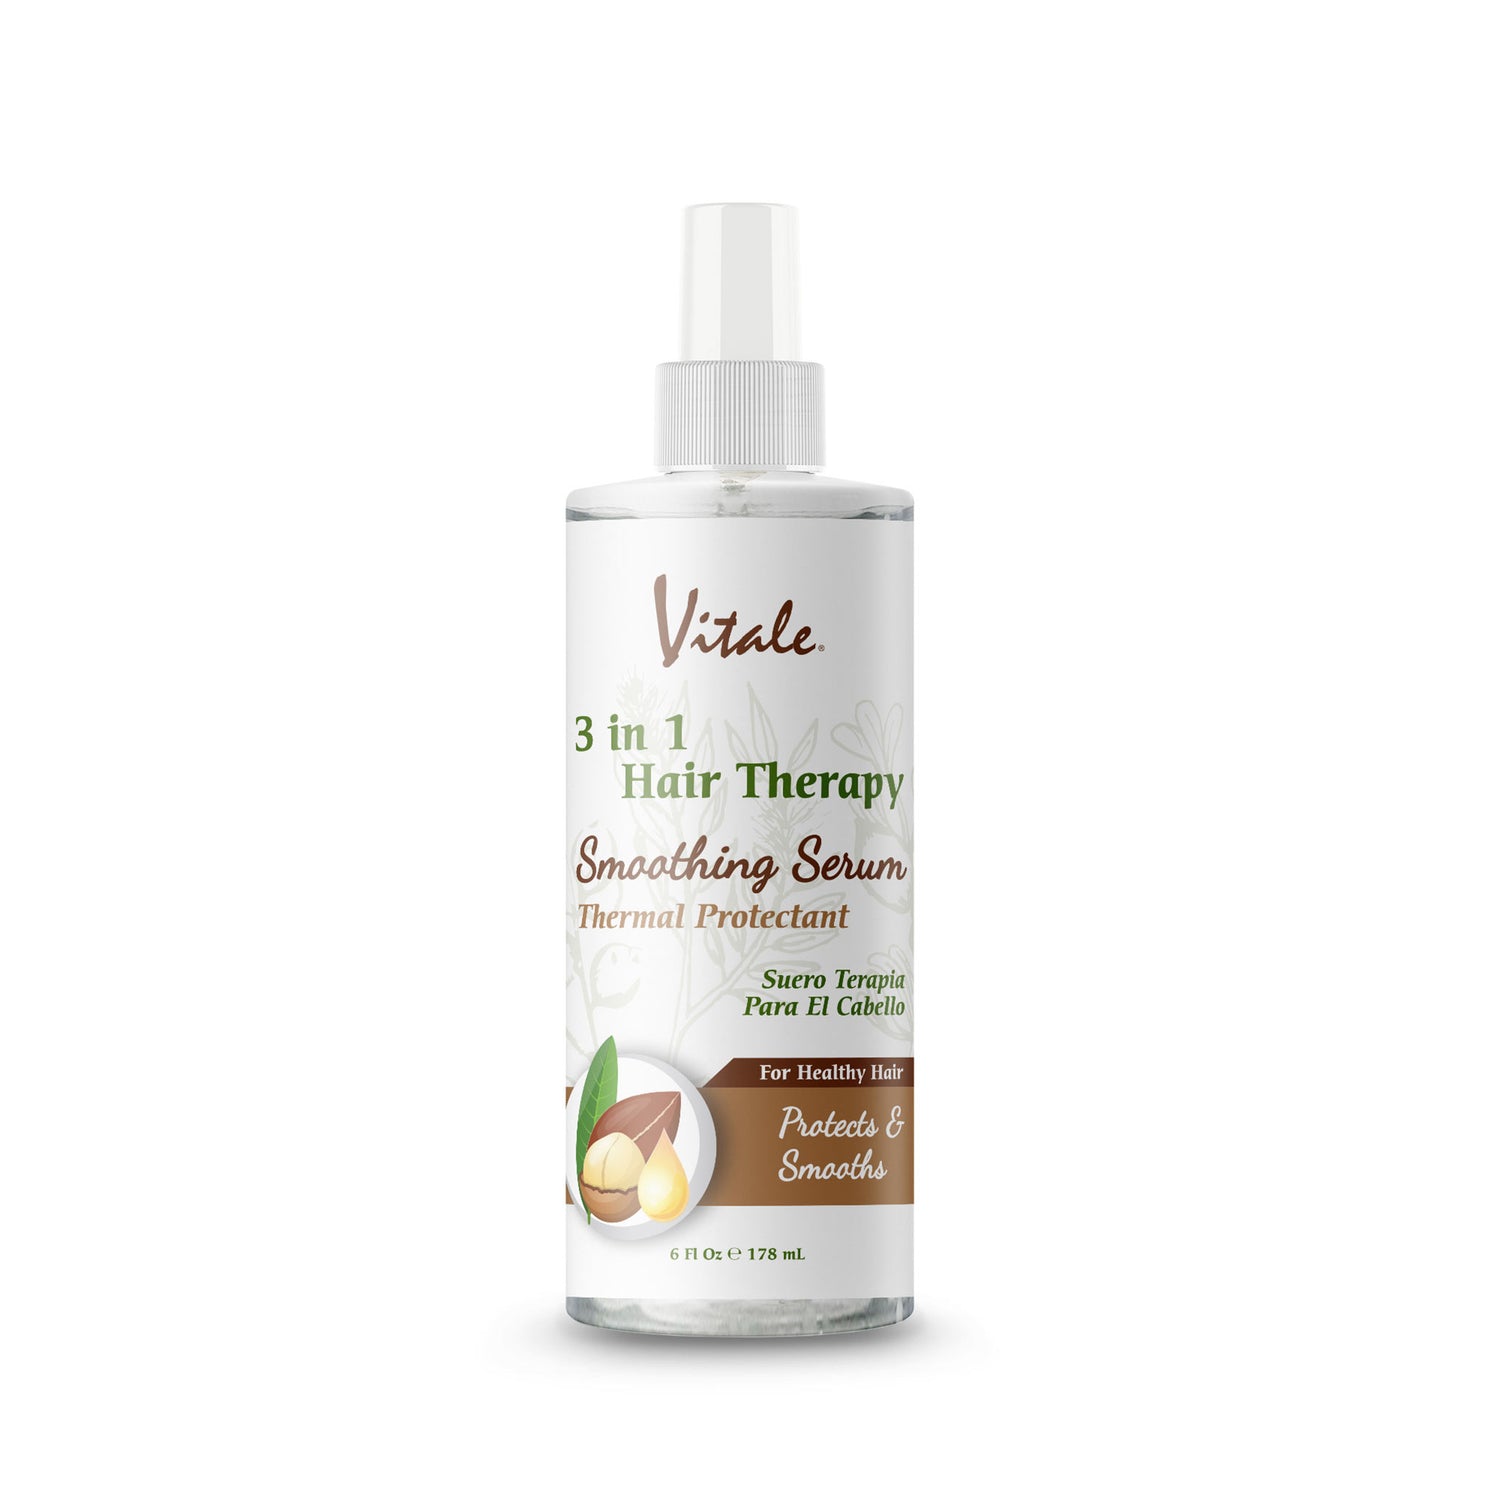 Vitale - Hair Therapy Treatment